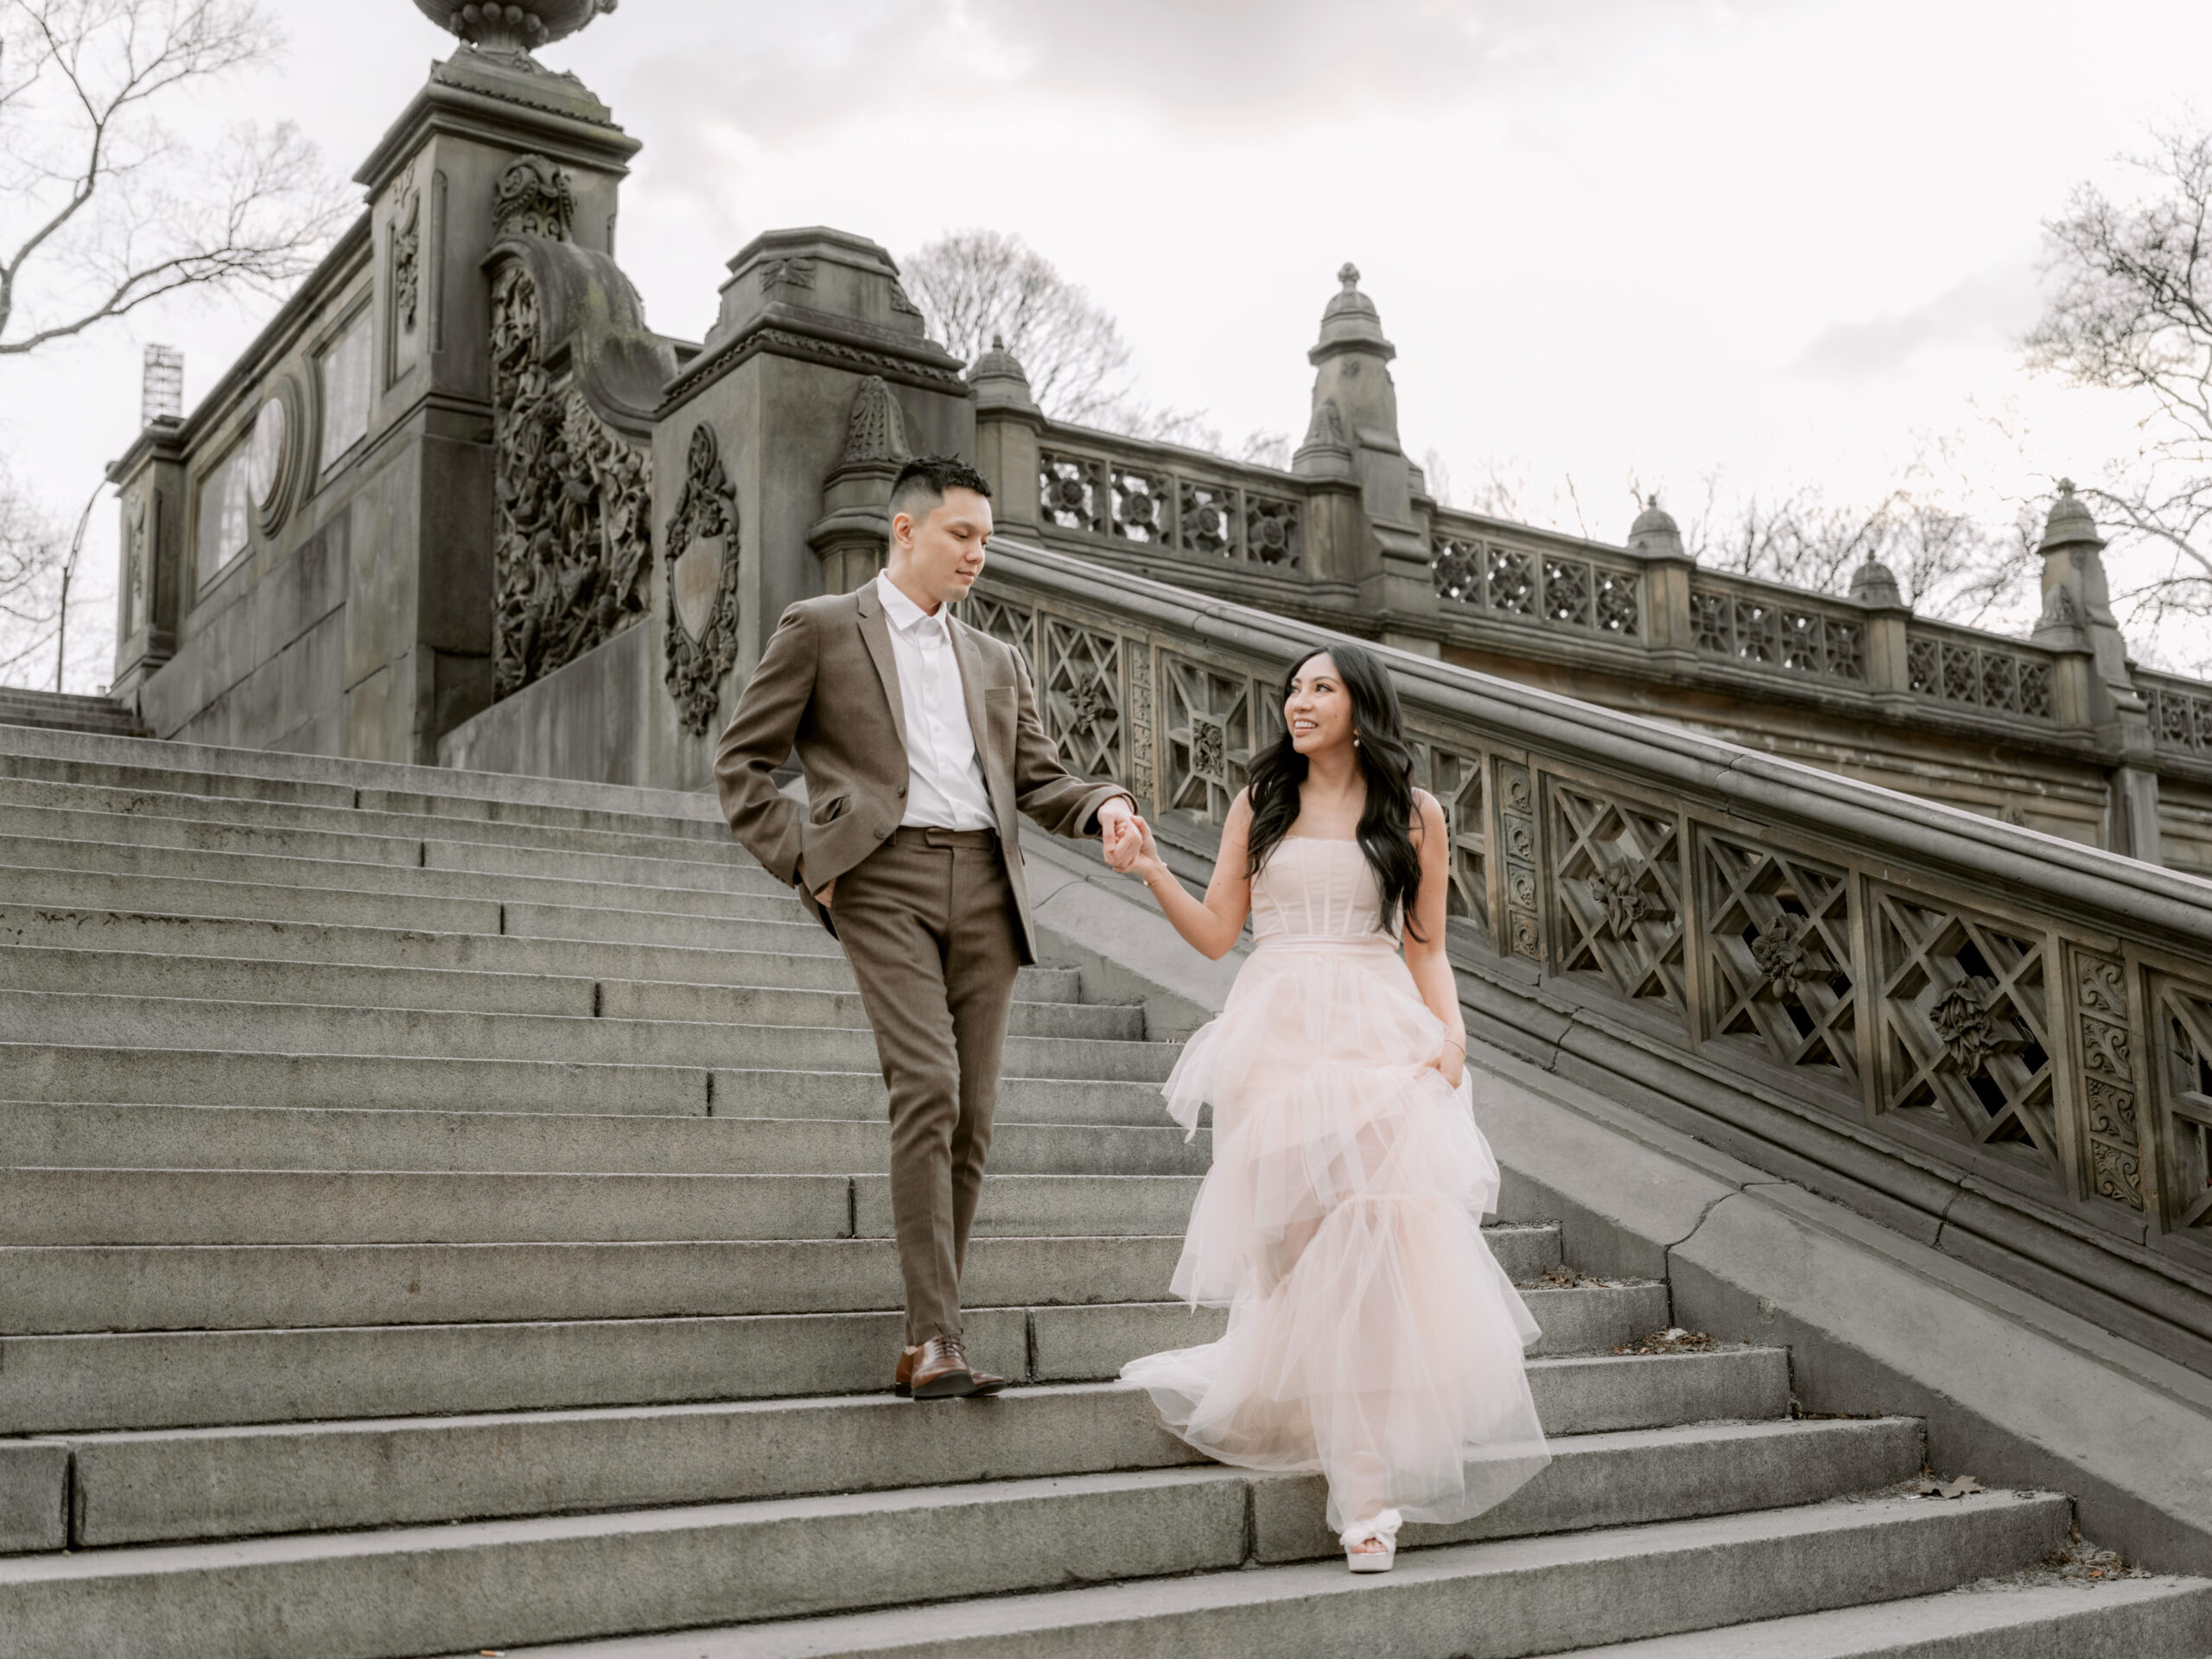 The engaged couple is walking down the staircase in a park. Image by Jenny Fu Studio